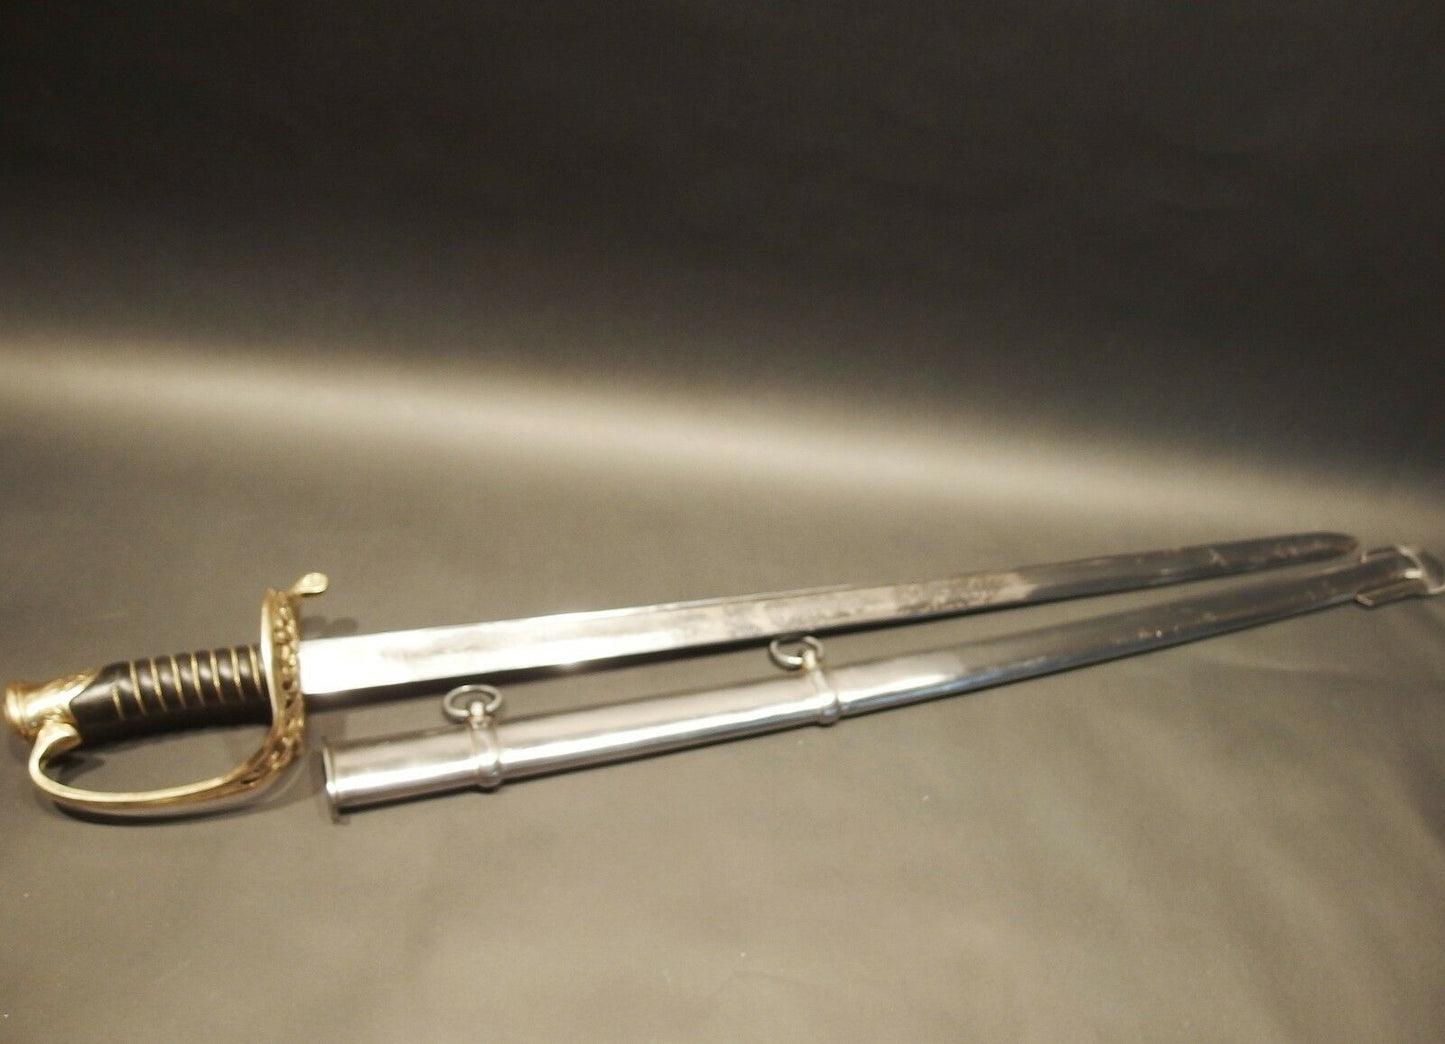 Antique Style 1860 Light Cavalry Saber Carbon Steel Sword Union US - Early Home Decor